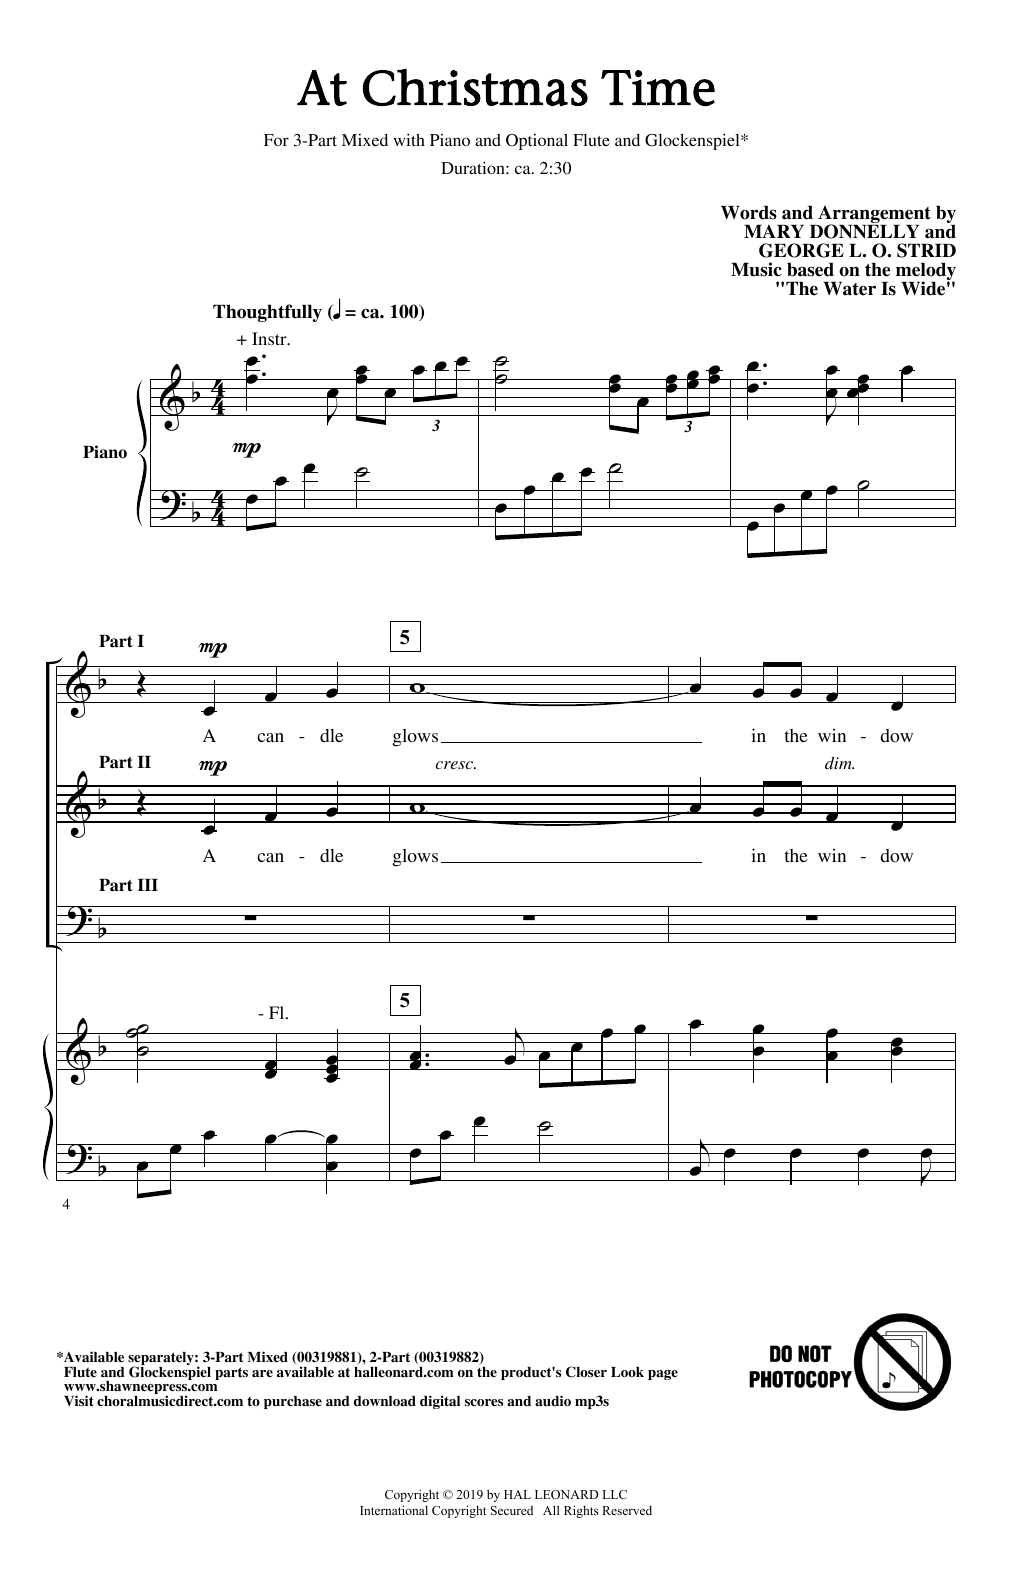 Download Mary Donnelly and George L.O. Strid At Christmas Time Sheet Music